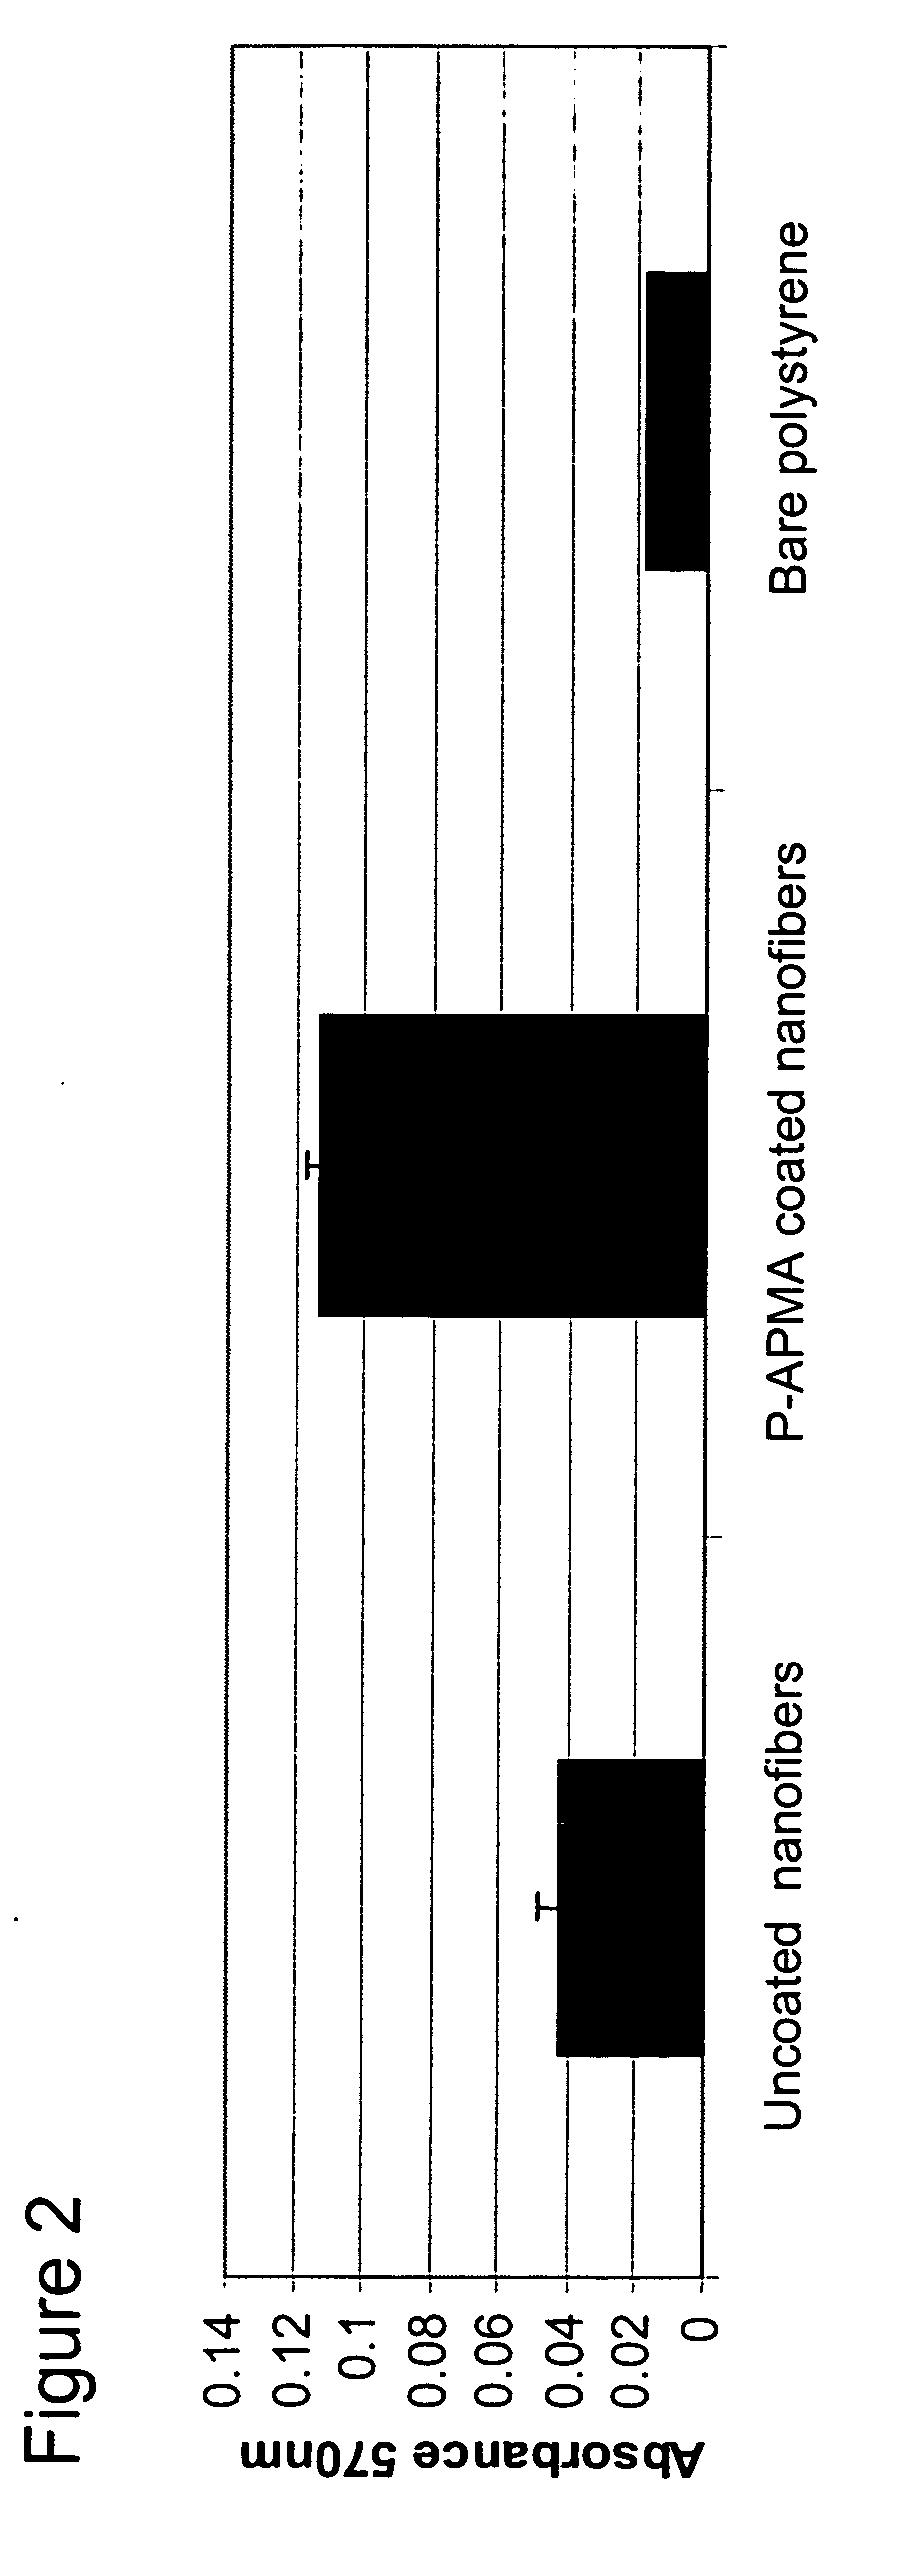 Polymer coated nanofibrillar structures and methods for cell maintenance and differentiation